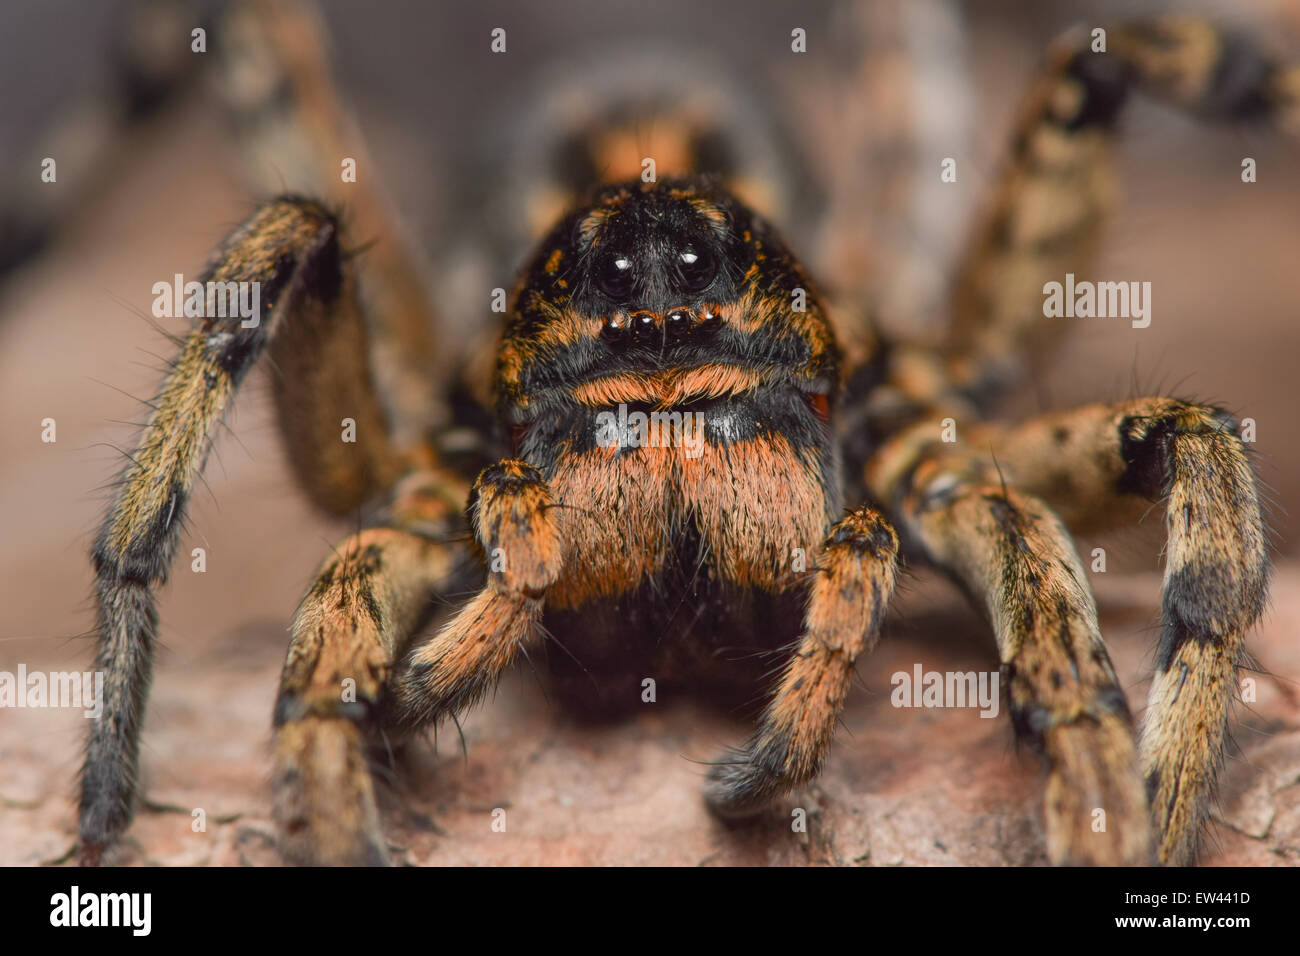 Wolf spider, front view Stock Photo